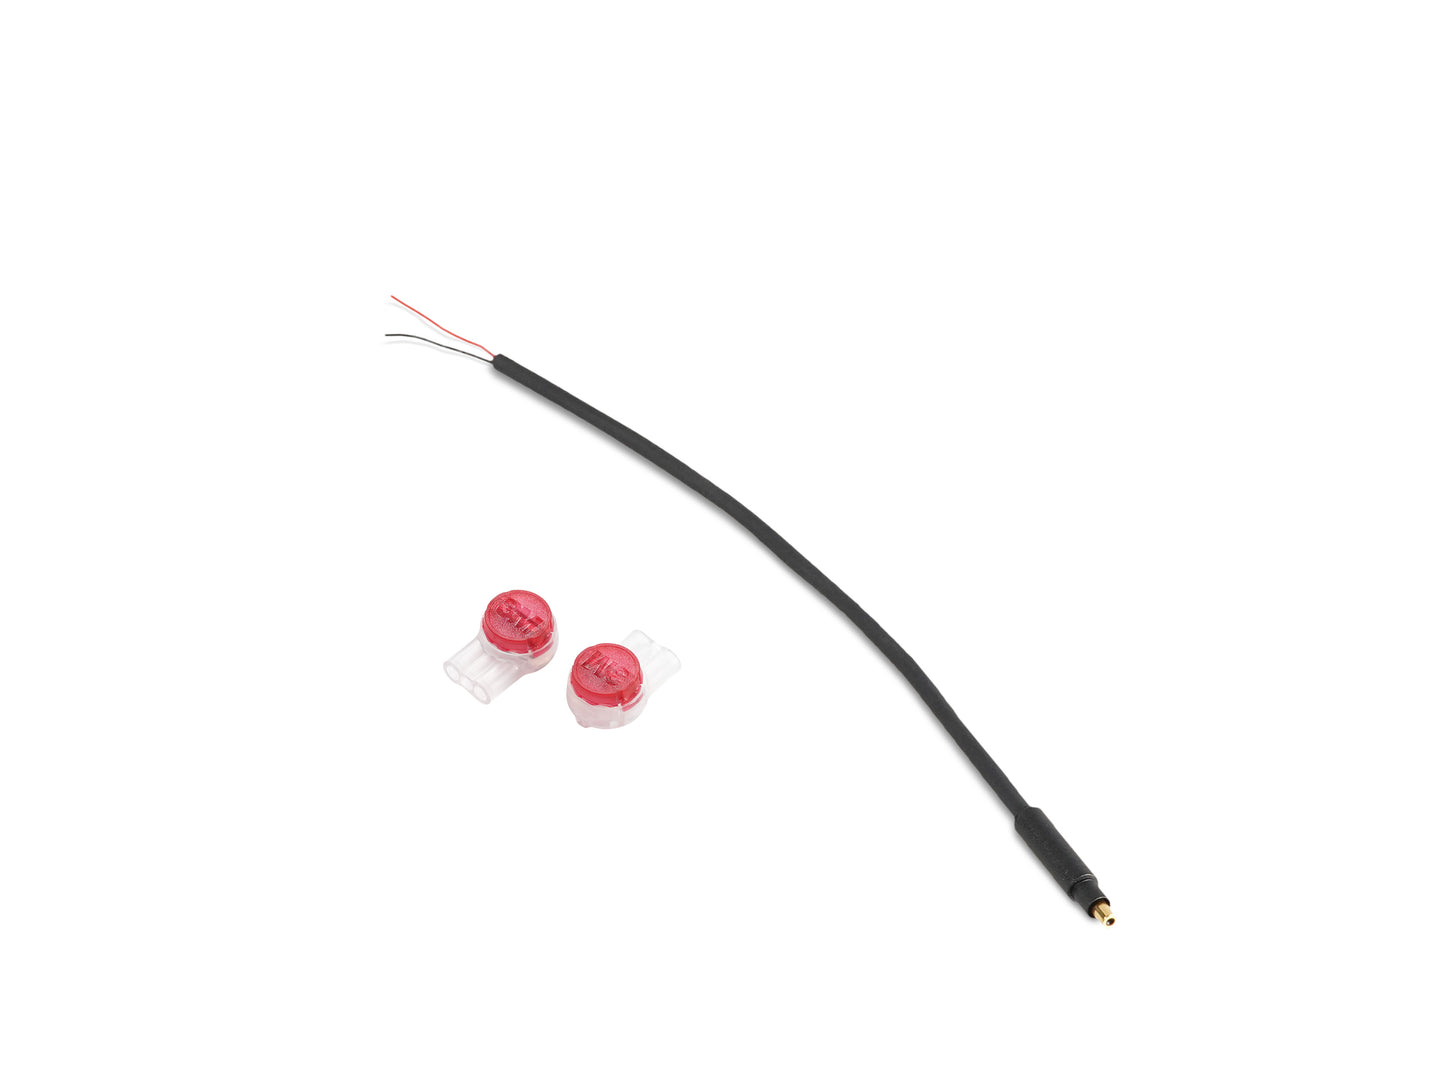 Tail light cable for E-Bikes